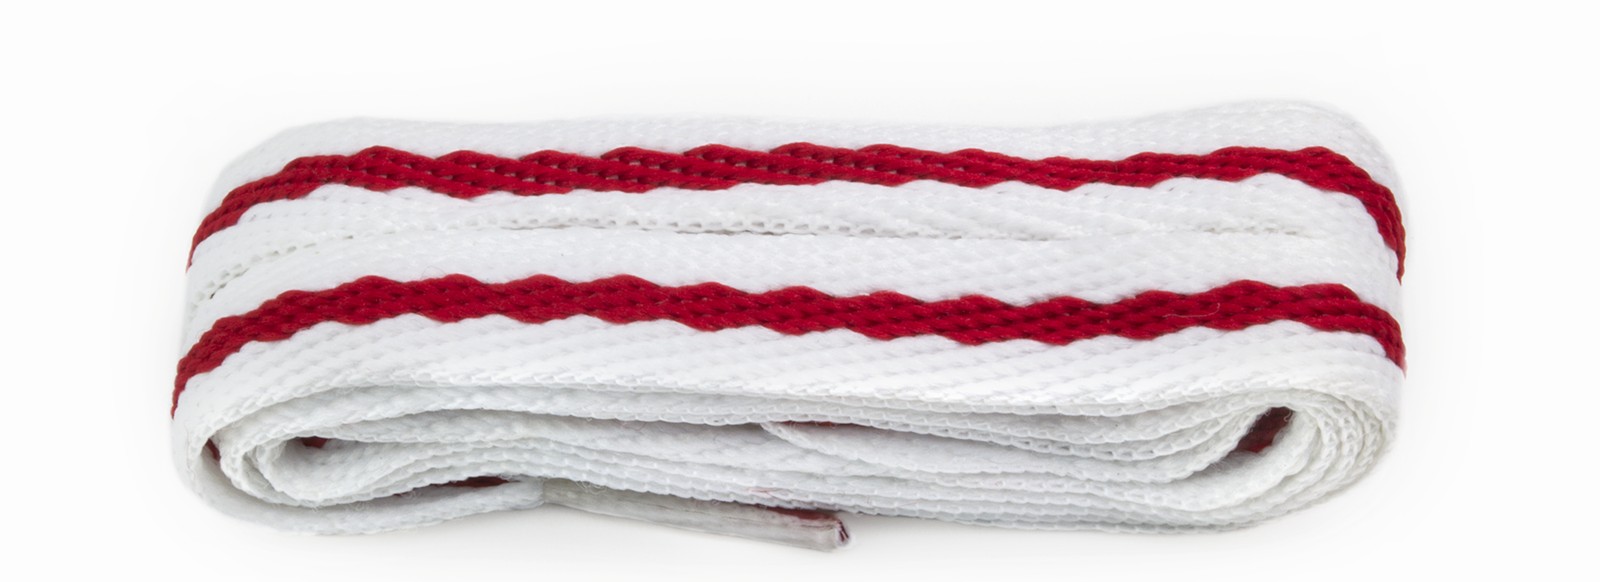 Red Stripe shoe laces | ShoeString 